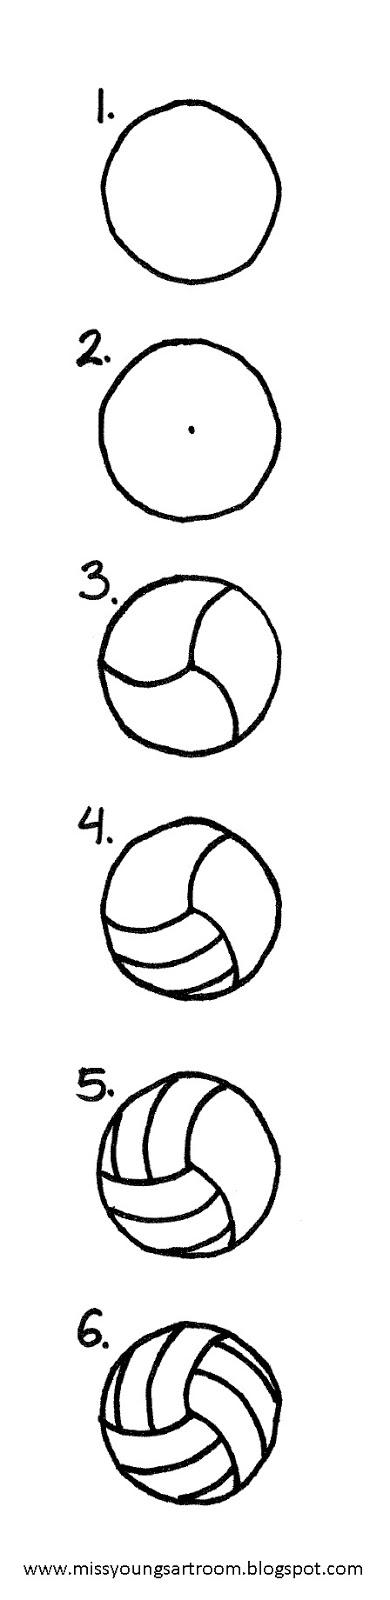 Miss Young's Art Room: How to Draw a Volleyball